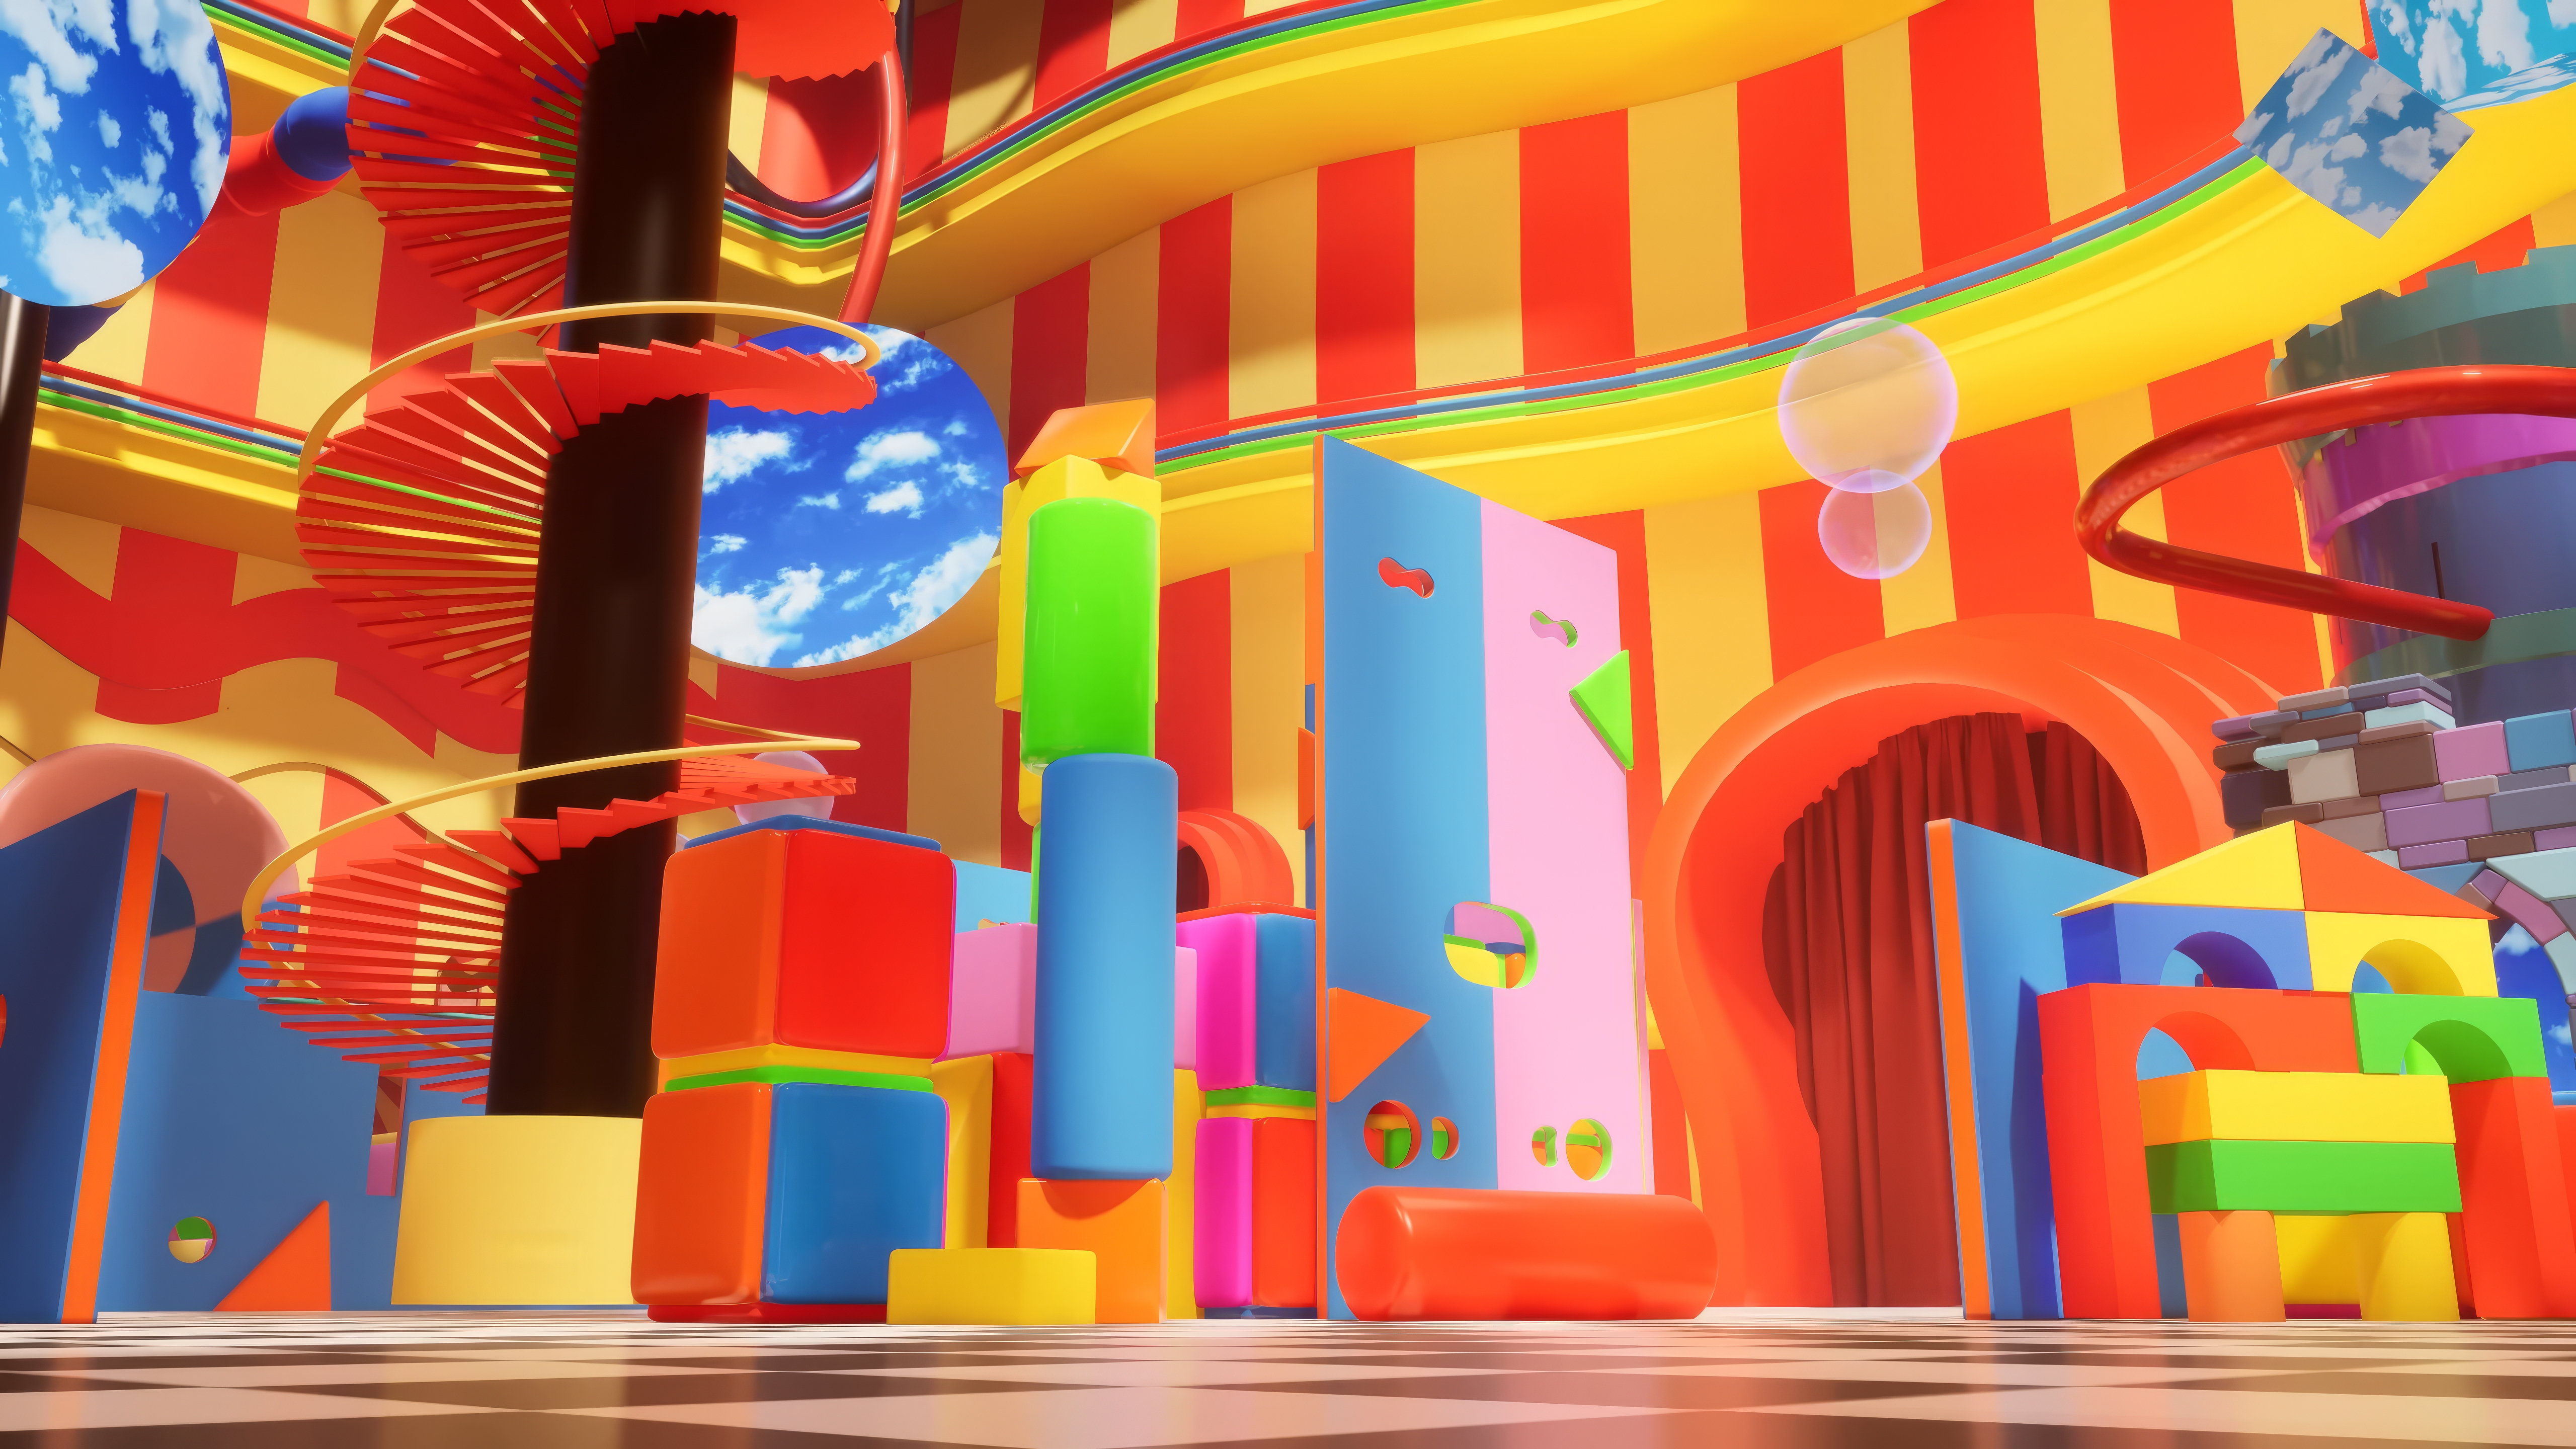 The Amazing Digital Circus Colorful Geometry Bright Stairs Striped Indoors 5120x2880